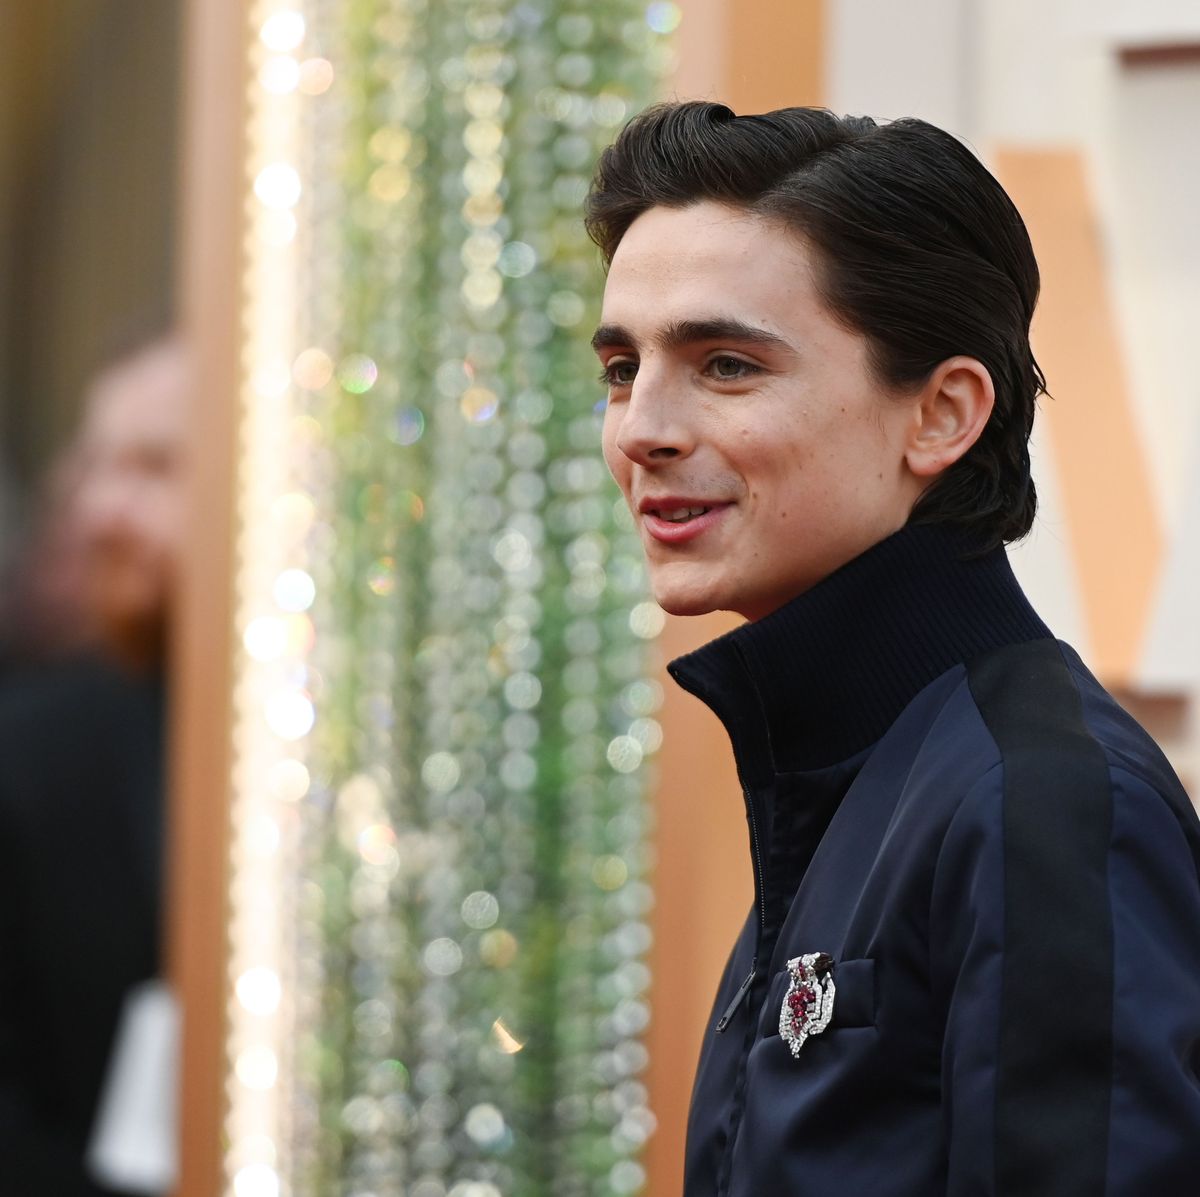 Timothée Chalamet Oscars 2020 outfit tore up the rule book